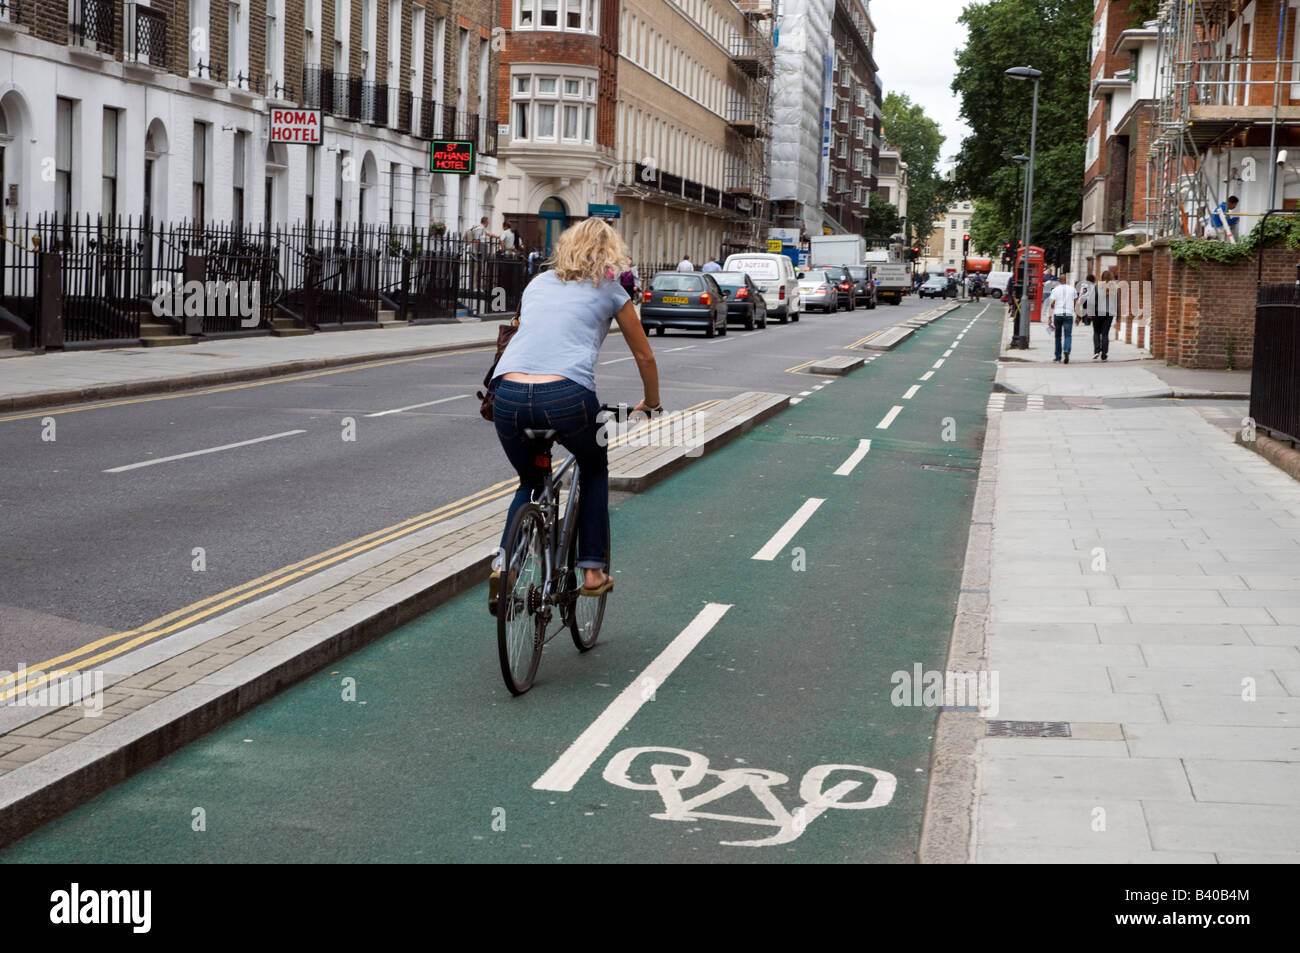 Cyclist riding in bicycle lane London England UK Stock Photo